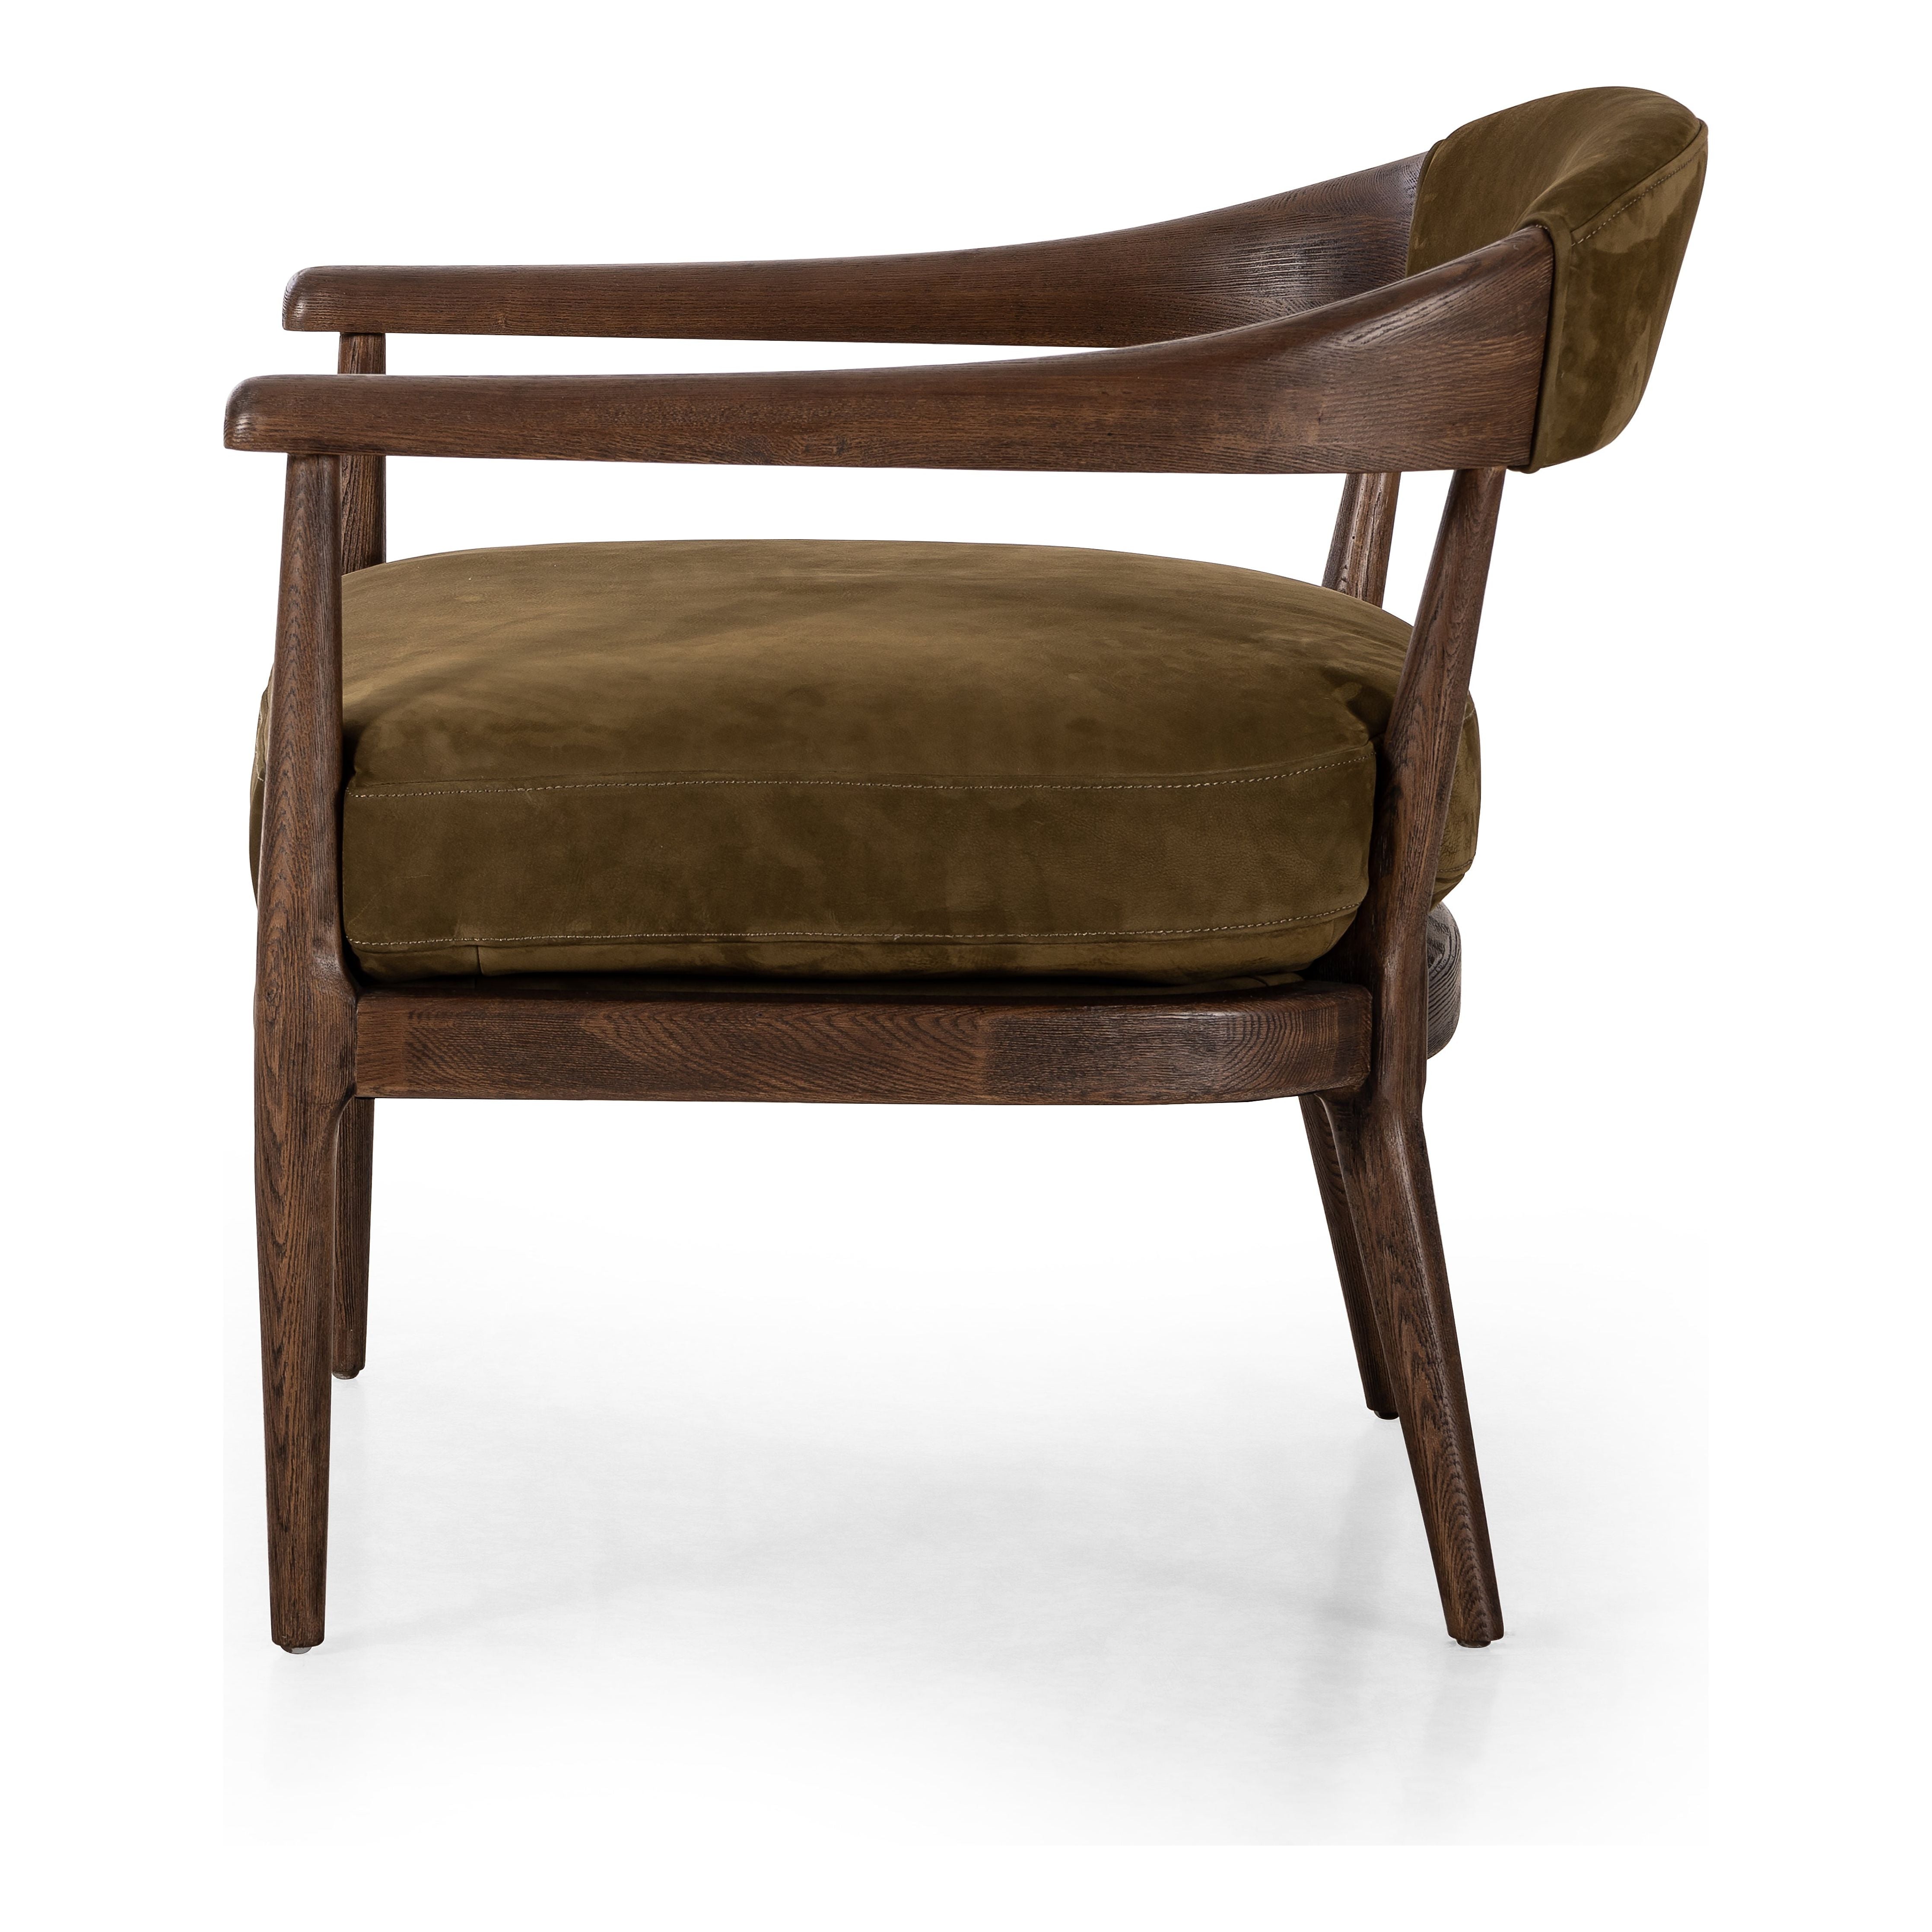 Safari styling is brought to modern speed on this vintage-inspired chair. Its solid wood frame features a webbed seating structure that brings a sink-in feel to the entire piece. The upholstered back, strap details and loose cushion are finished in a rich Italian-made leather with a soft, buttery feel and subtle highs and lows throughout the hide that bring movement to the entire piece. Amethyst Home provides interior design, new construction, custom furniture, and area rugs in the Calabasas metro area.